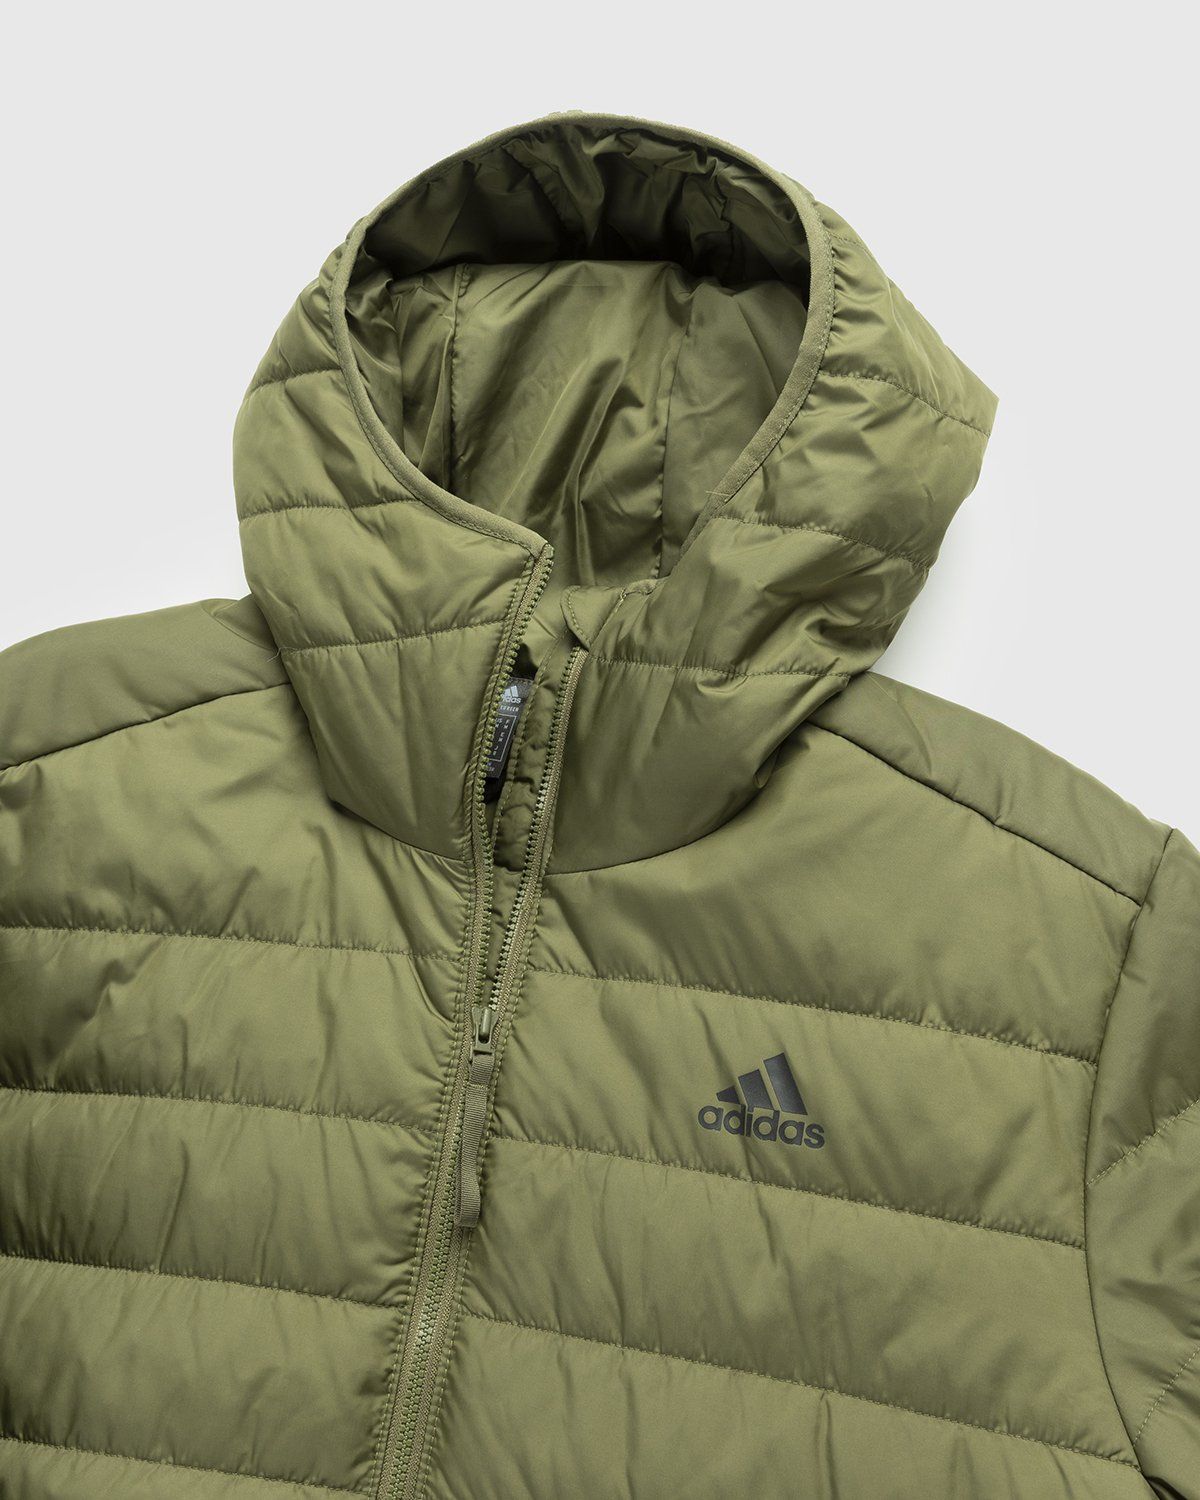 Adidas – Itavic 3-Stripes Midweight Hooded Jacket Olive - Outerwear - Green - Image 3